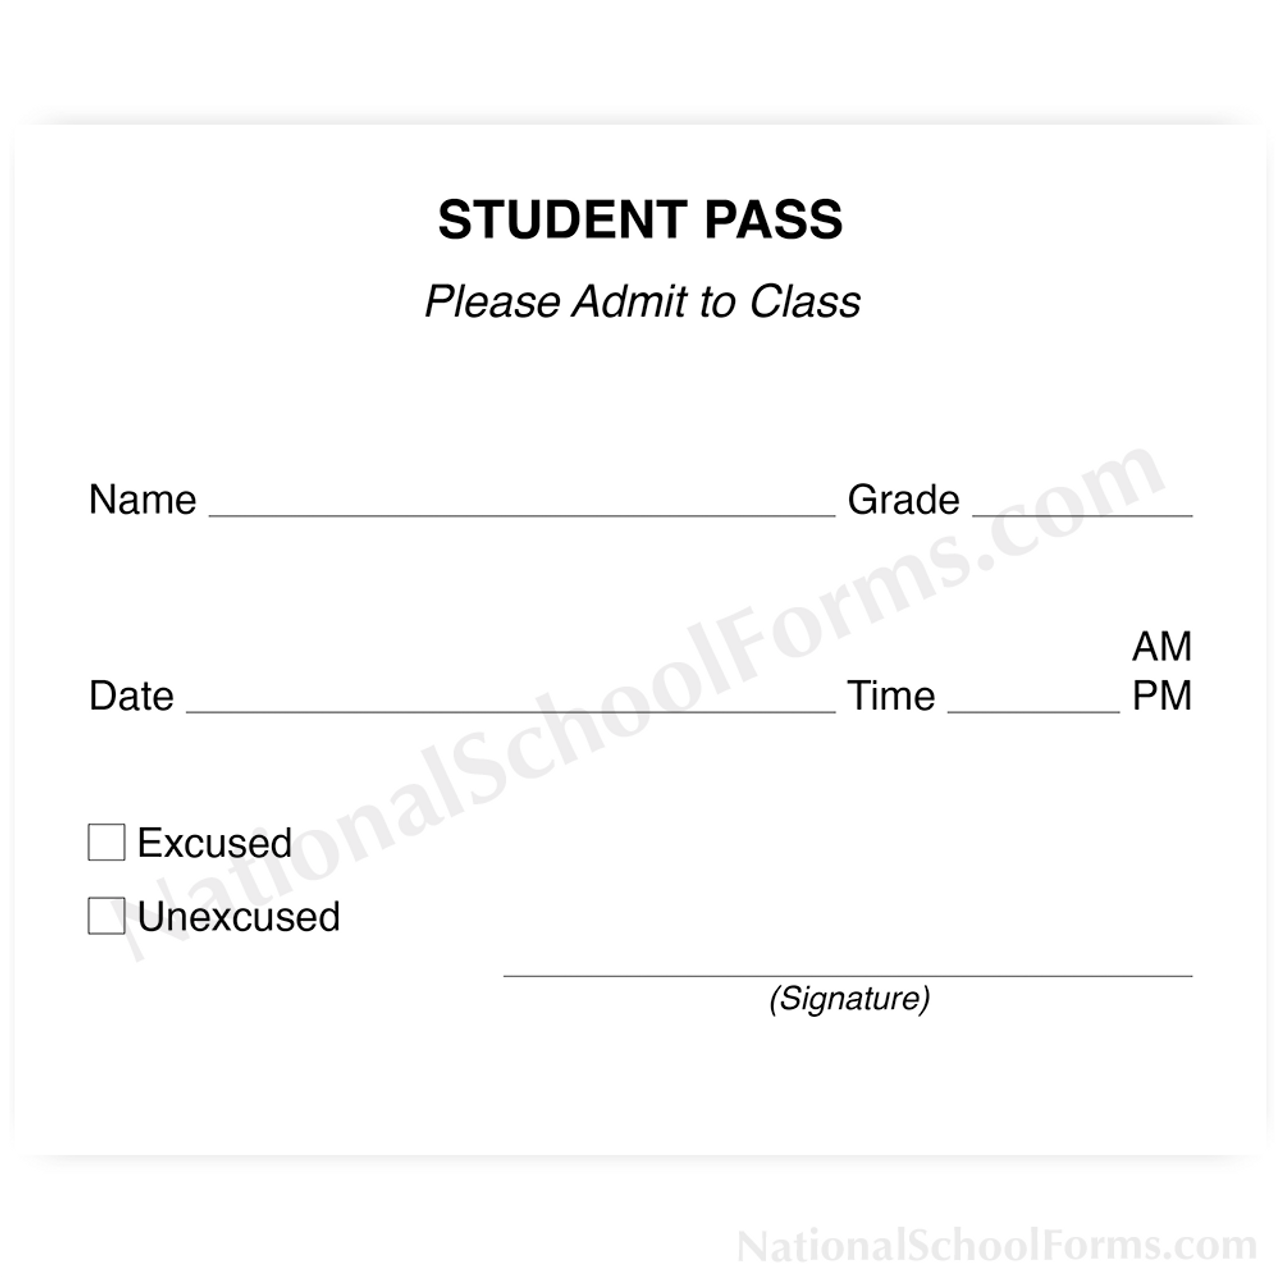 Student Pass Slip #165 - perfect for Late or Tardy admit to class, or just a student needing a pass back to class